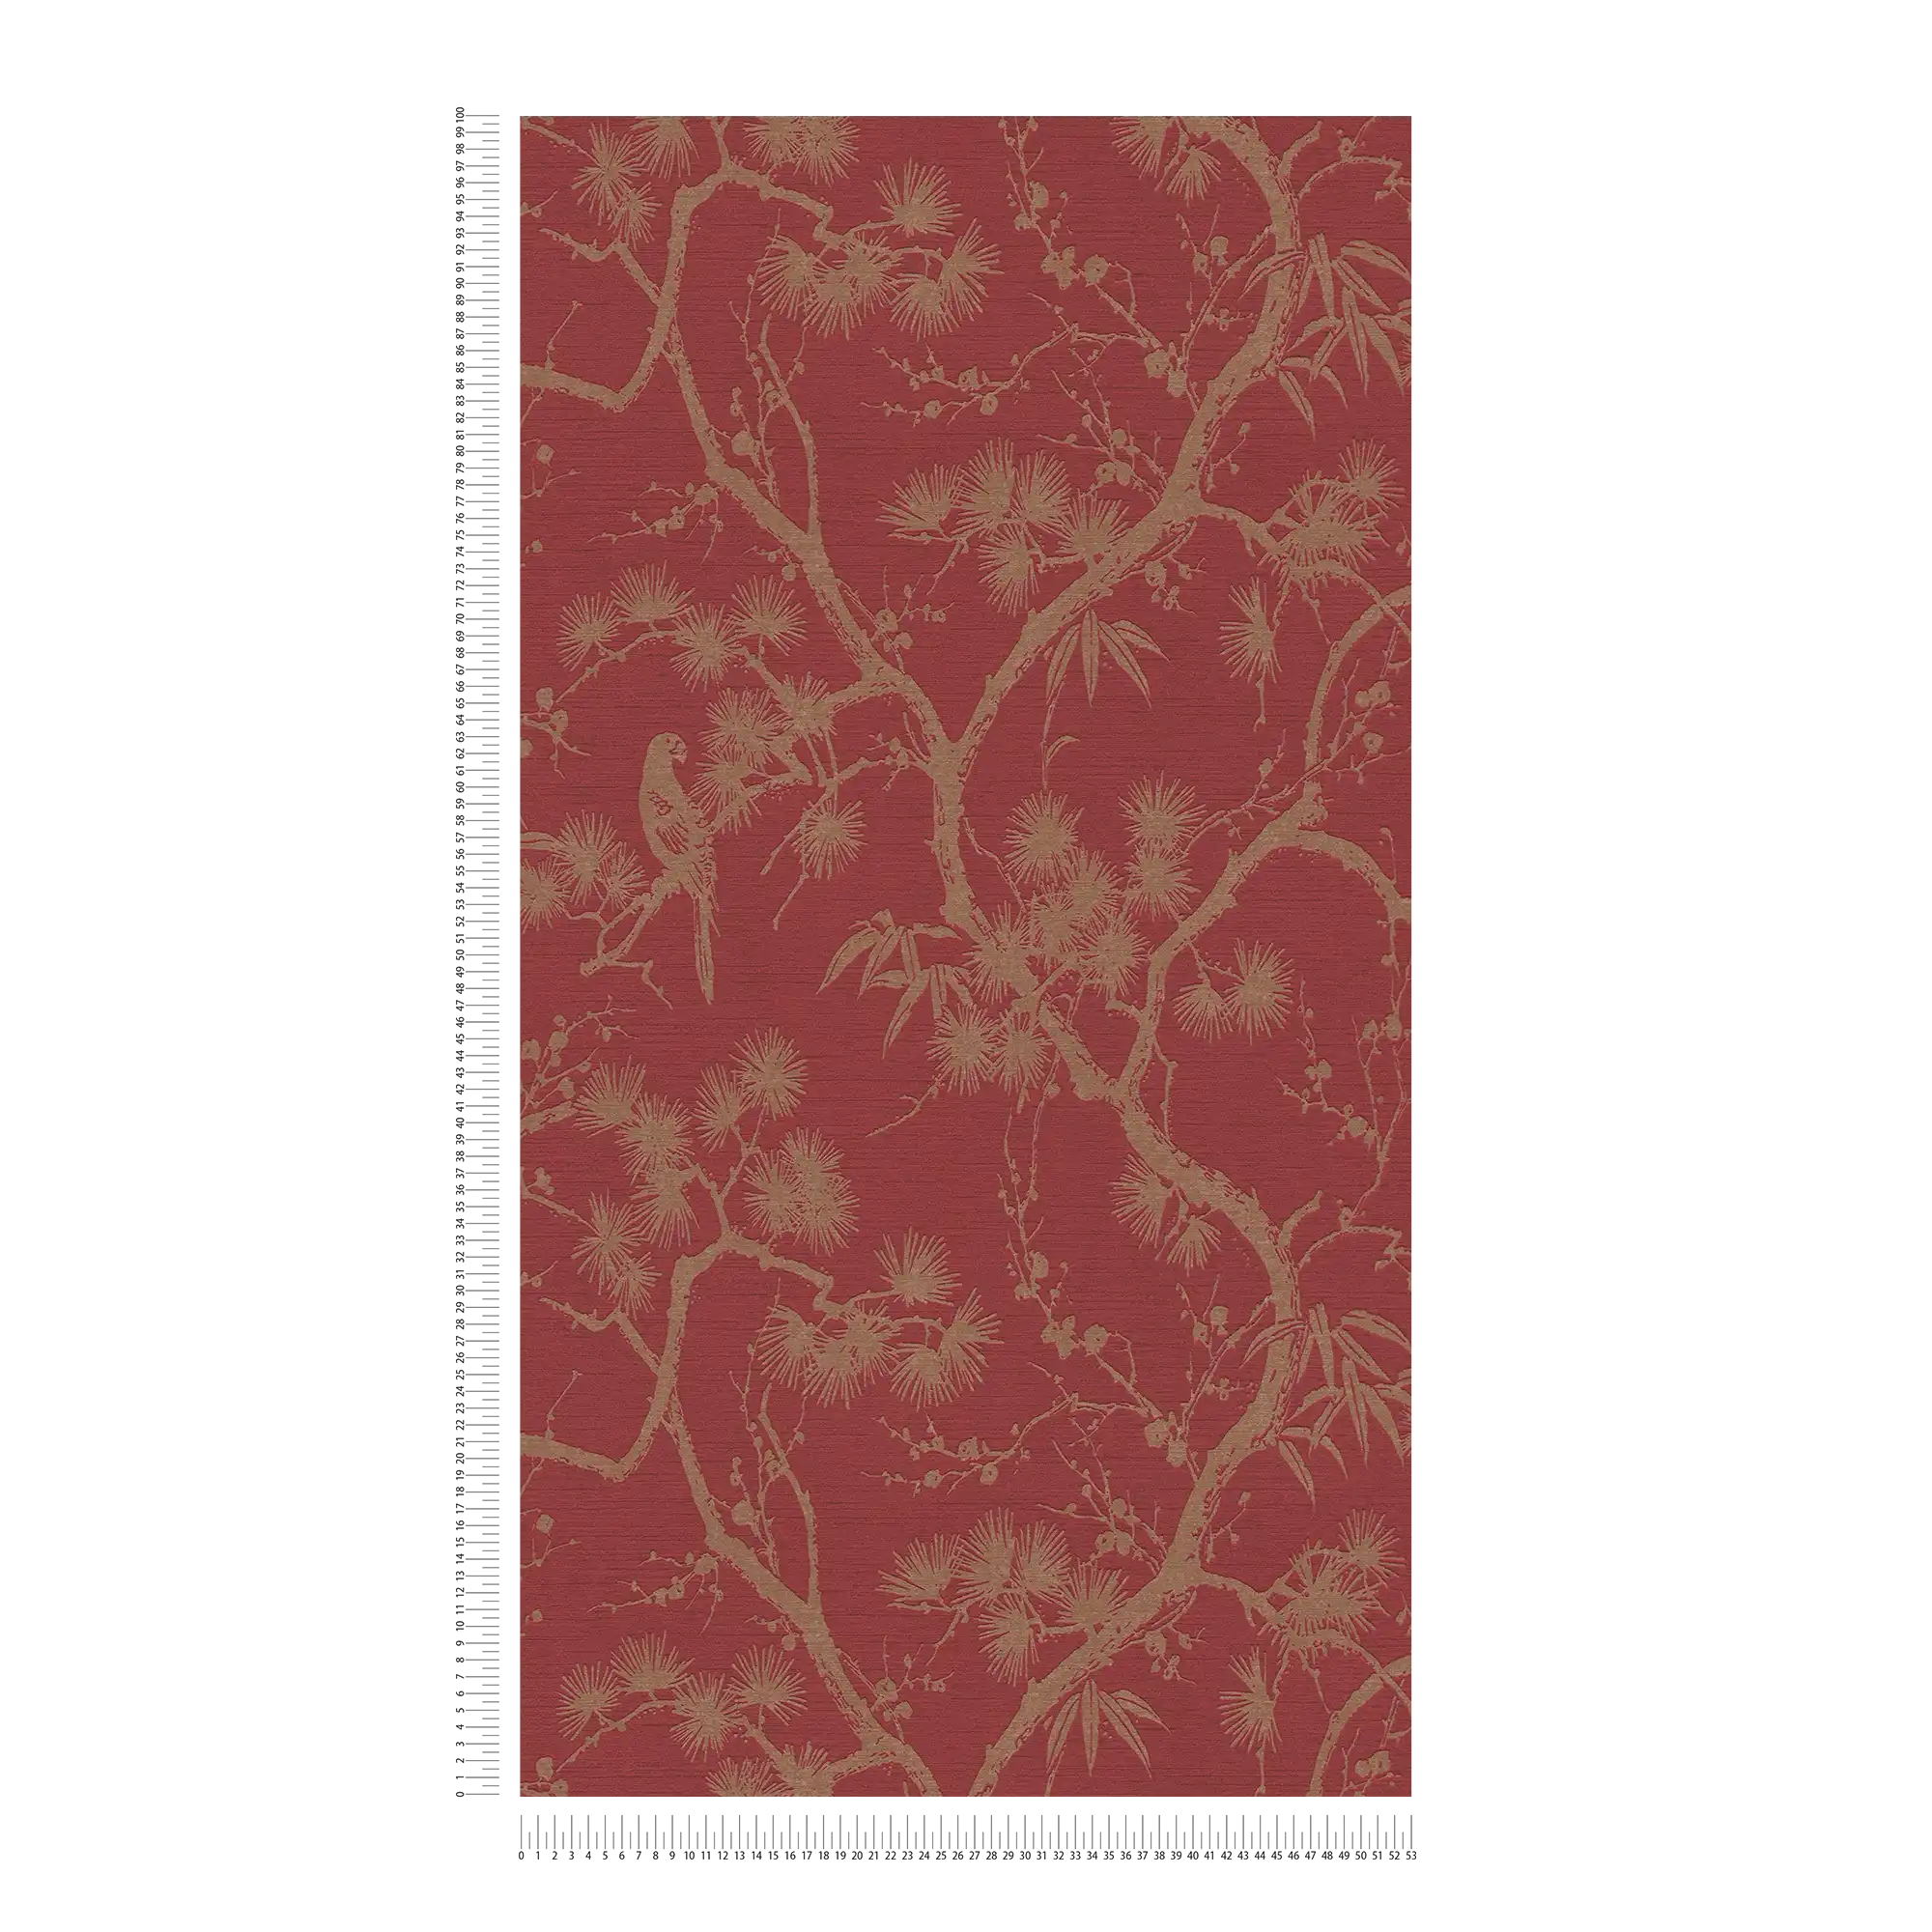             Non-woven wallpaper with natural design & gold pattern - metallic, red
        